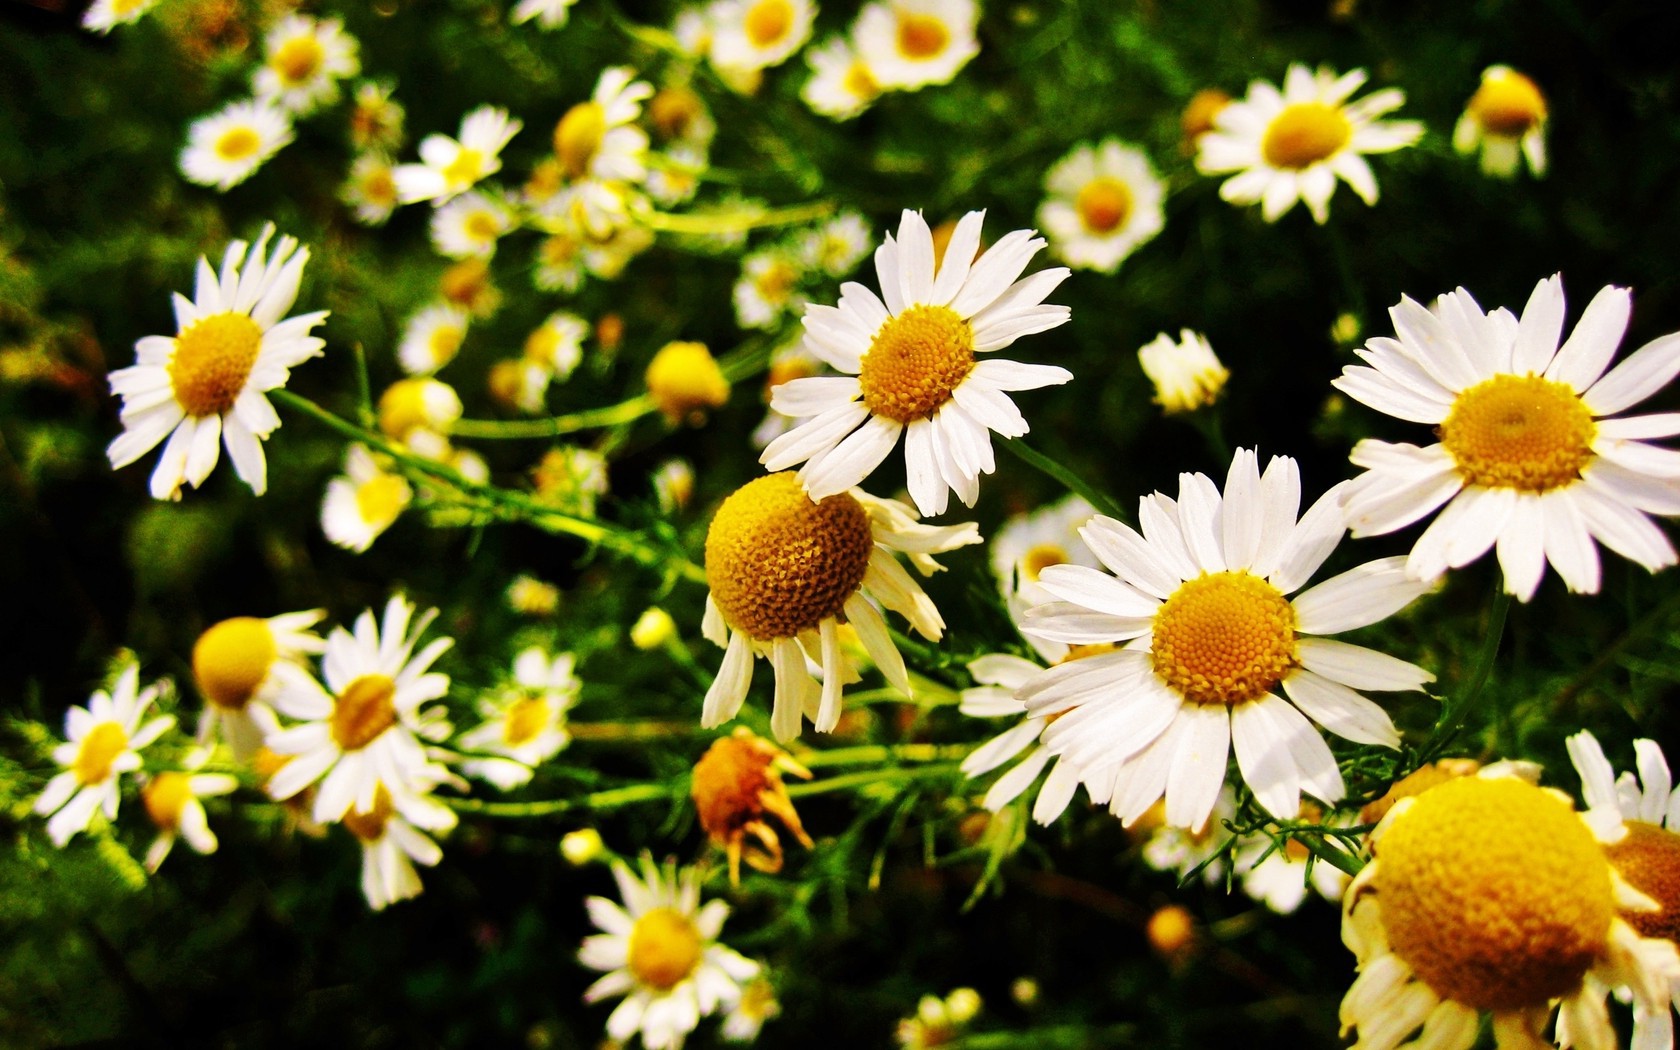 General 1680x1050 flowers daisies chamomile white flowers nature plants closeup